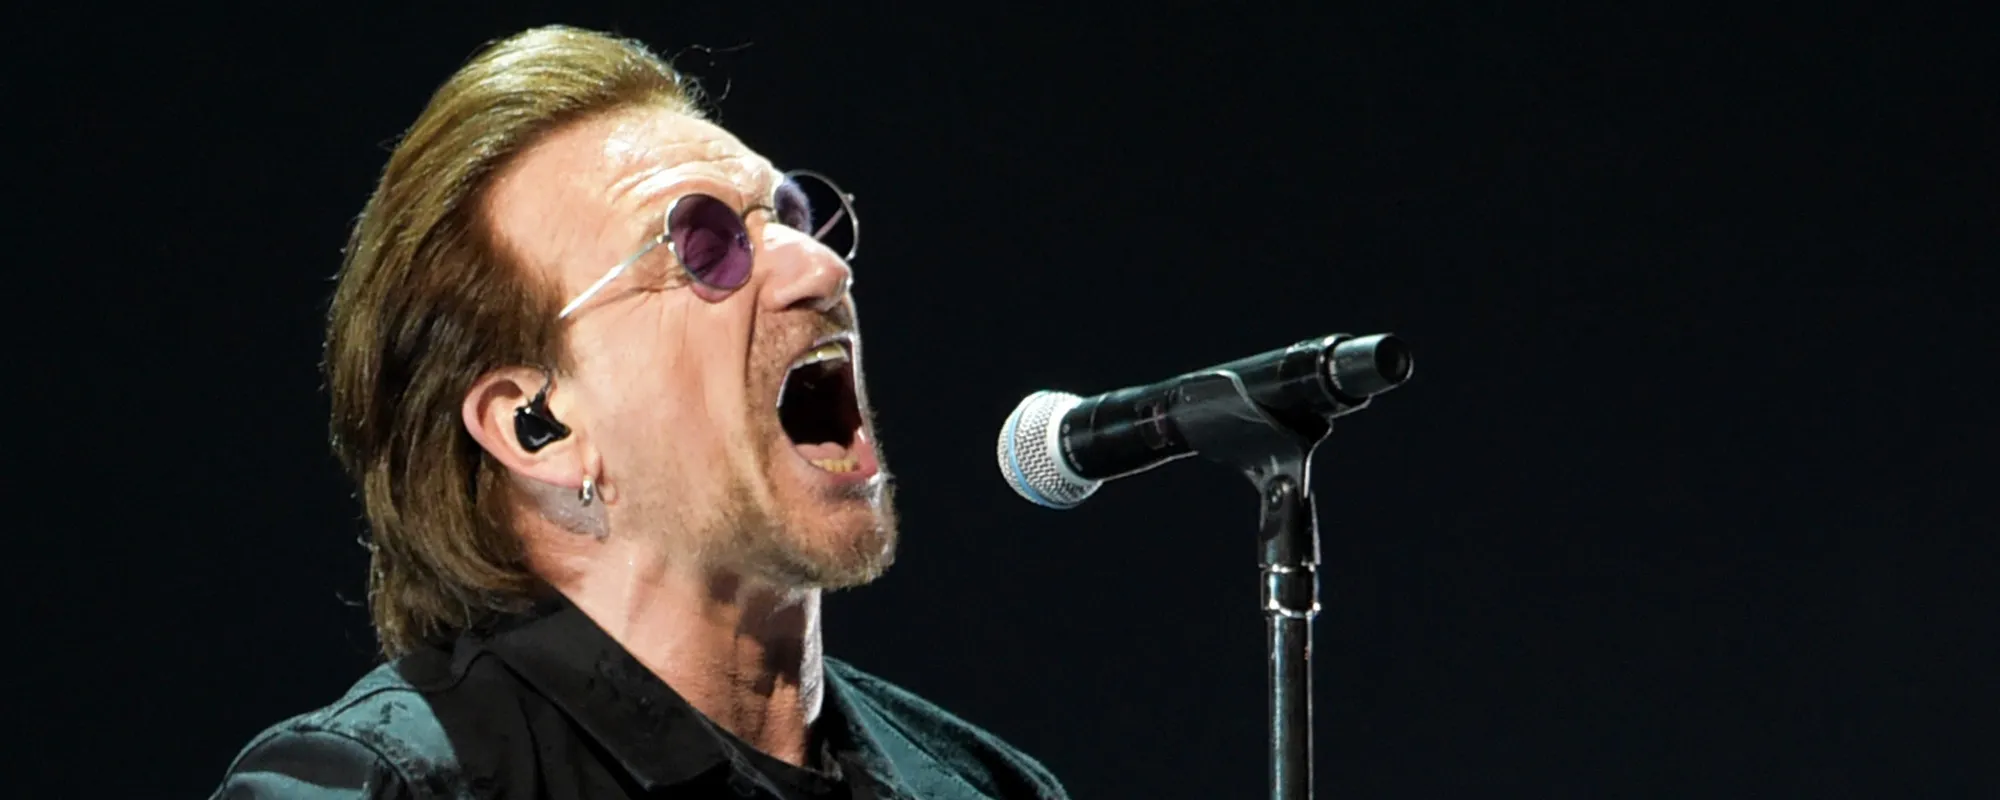 Artist’s Remorse: Why ‘No Line on the Horizon’ Didn’t Meet U2’s Expectations